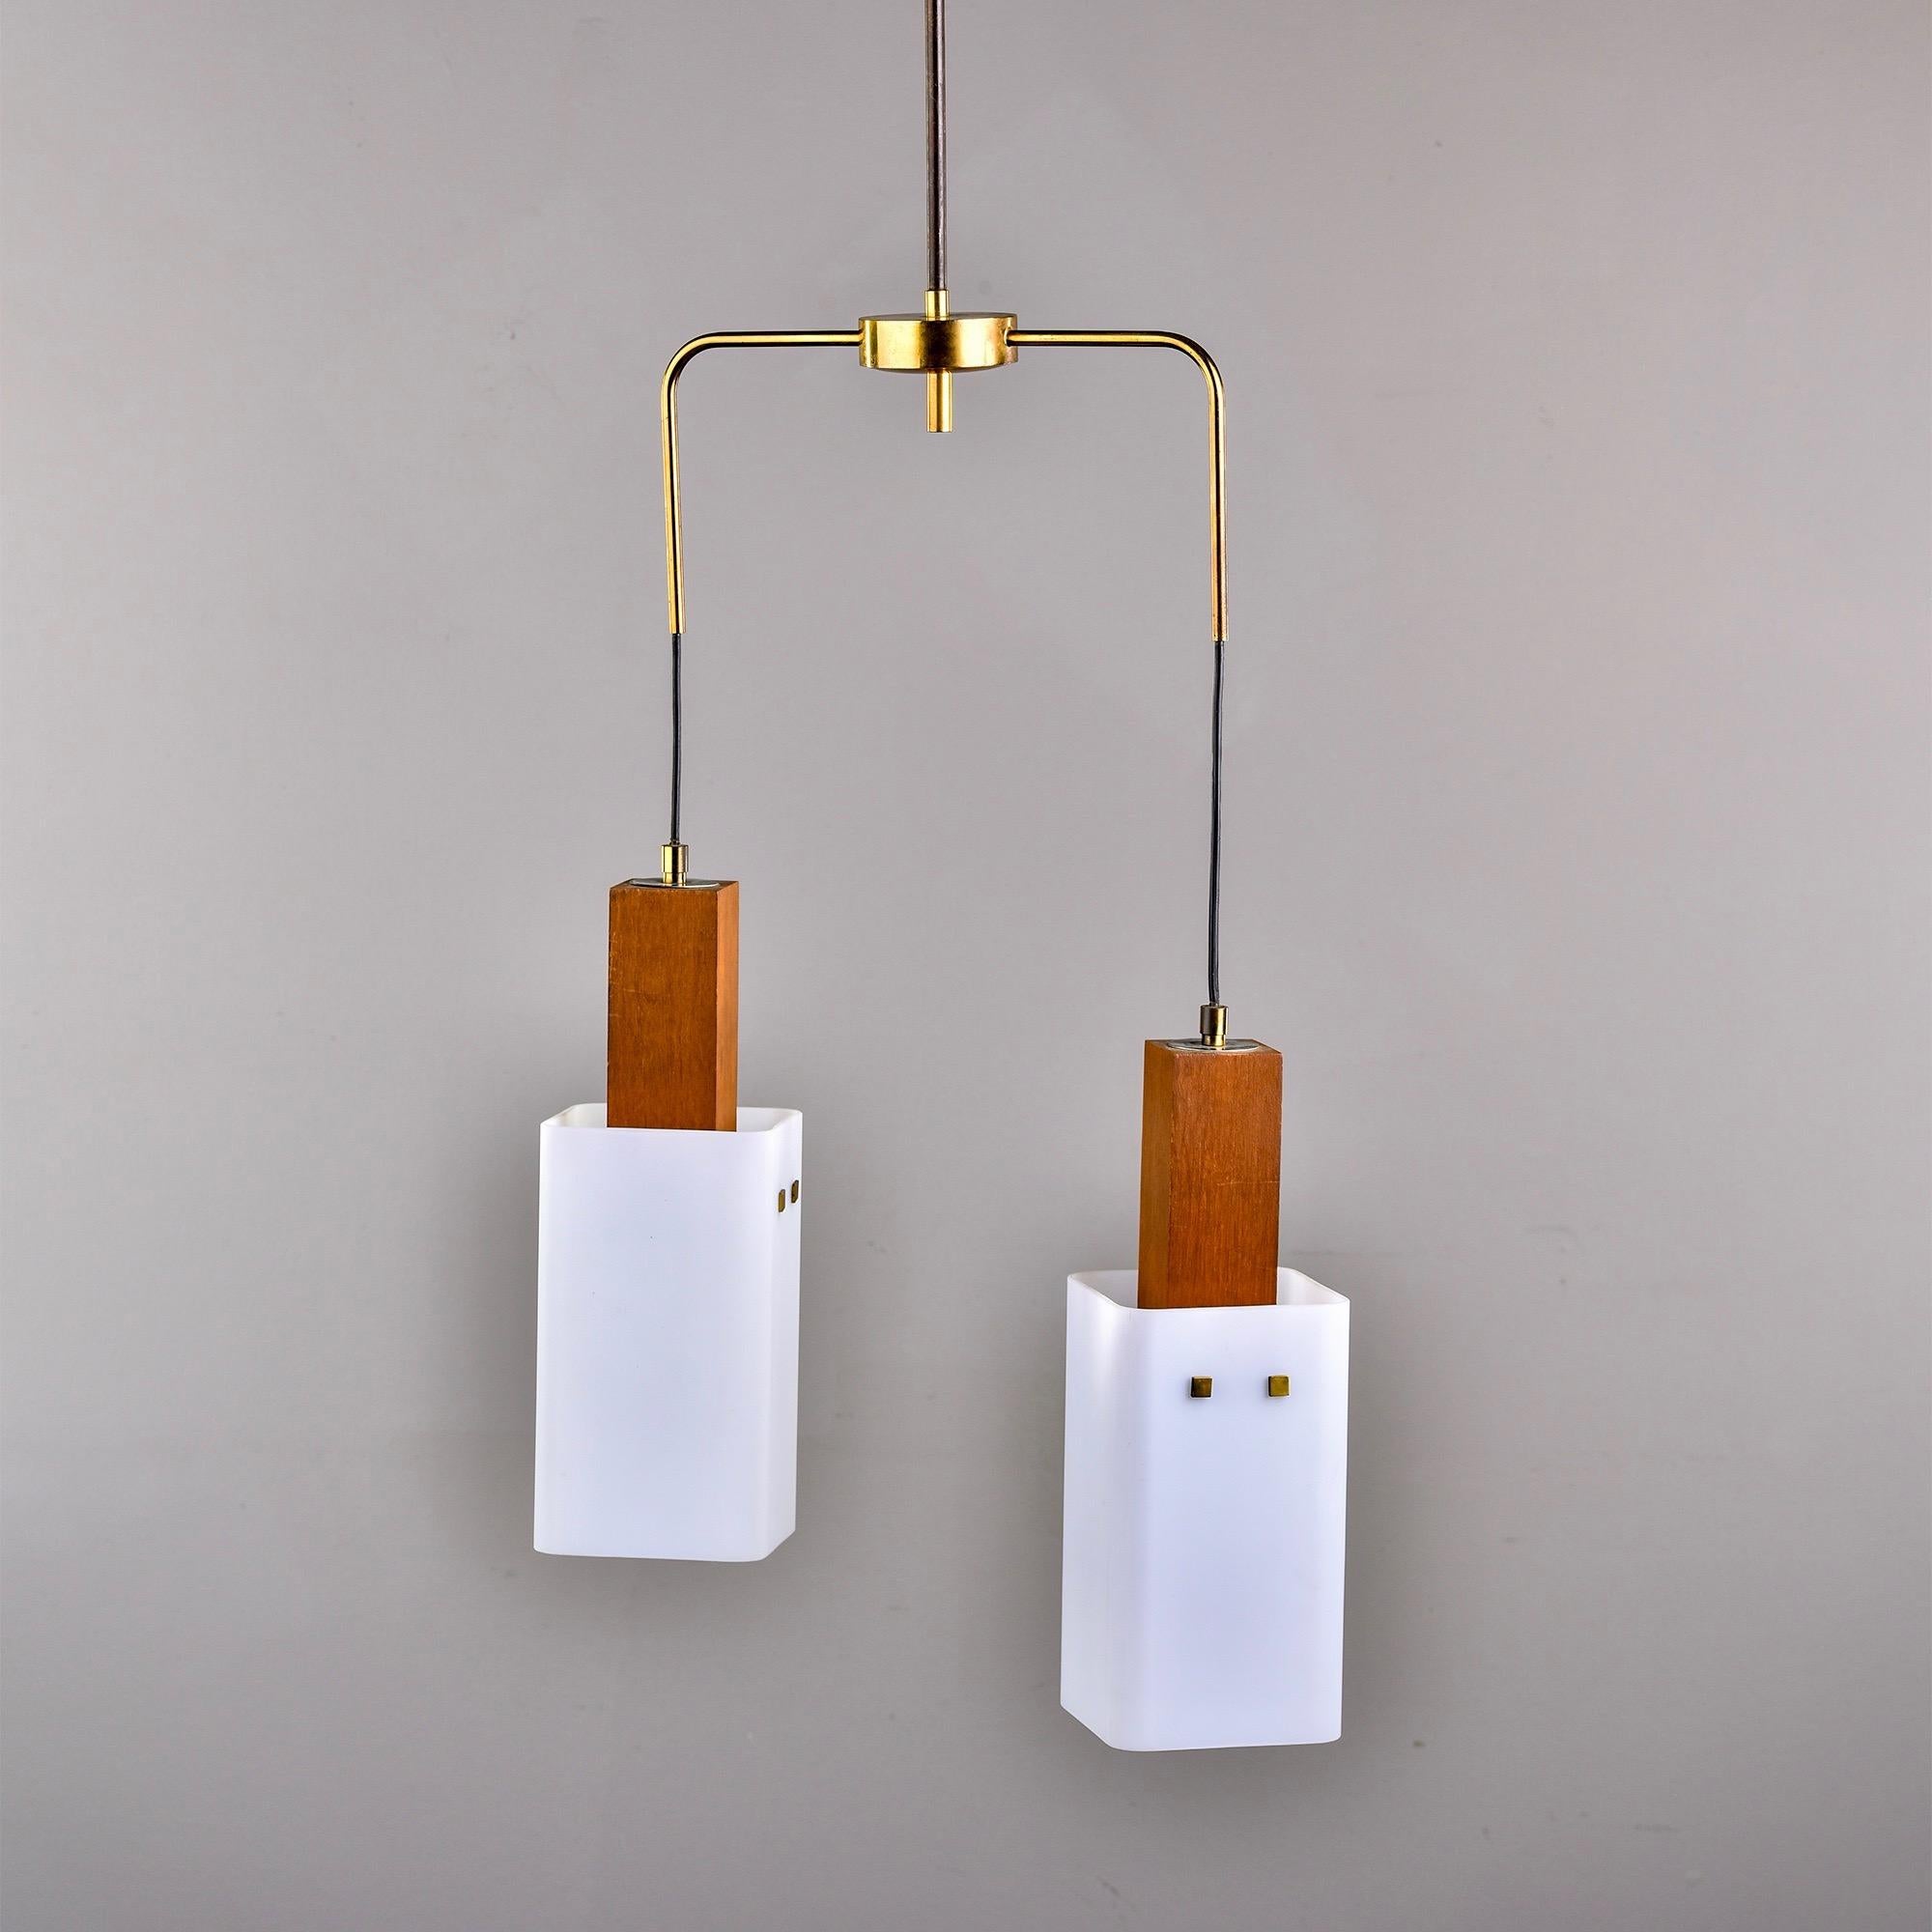 Circa 1960s two light hanging Scandinavian light fixture with rectangular white glass globes, teak bodies and a brass frame. Unknown maker. New wiring for US electrical standards. 

Measures: Fixture only: 5” H x 5” W x 5” D
Frame: 18” H x 12.5”